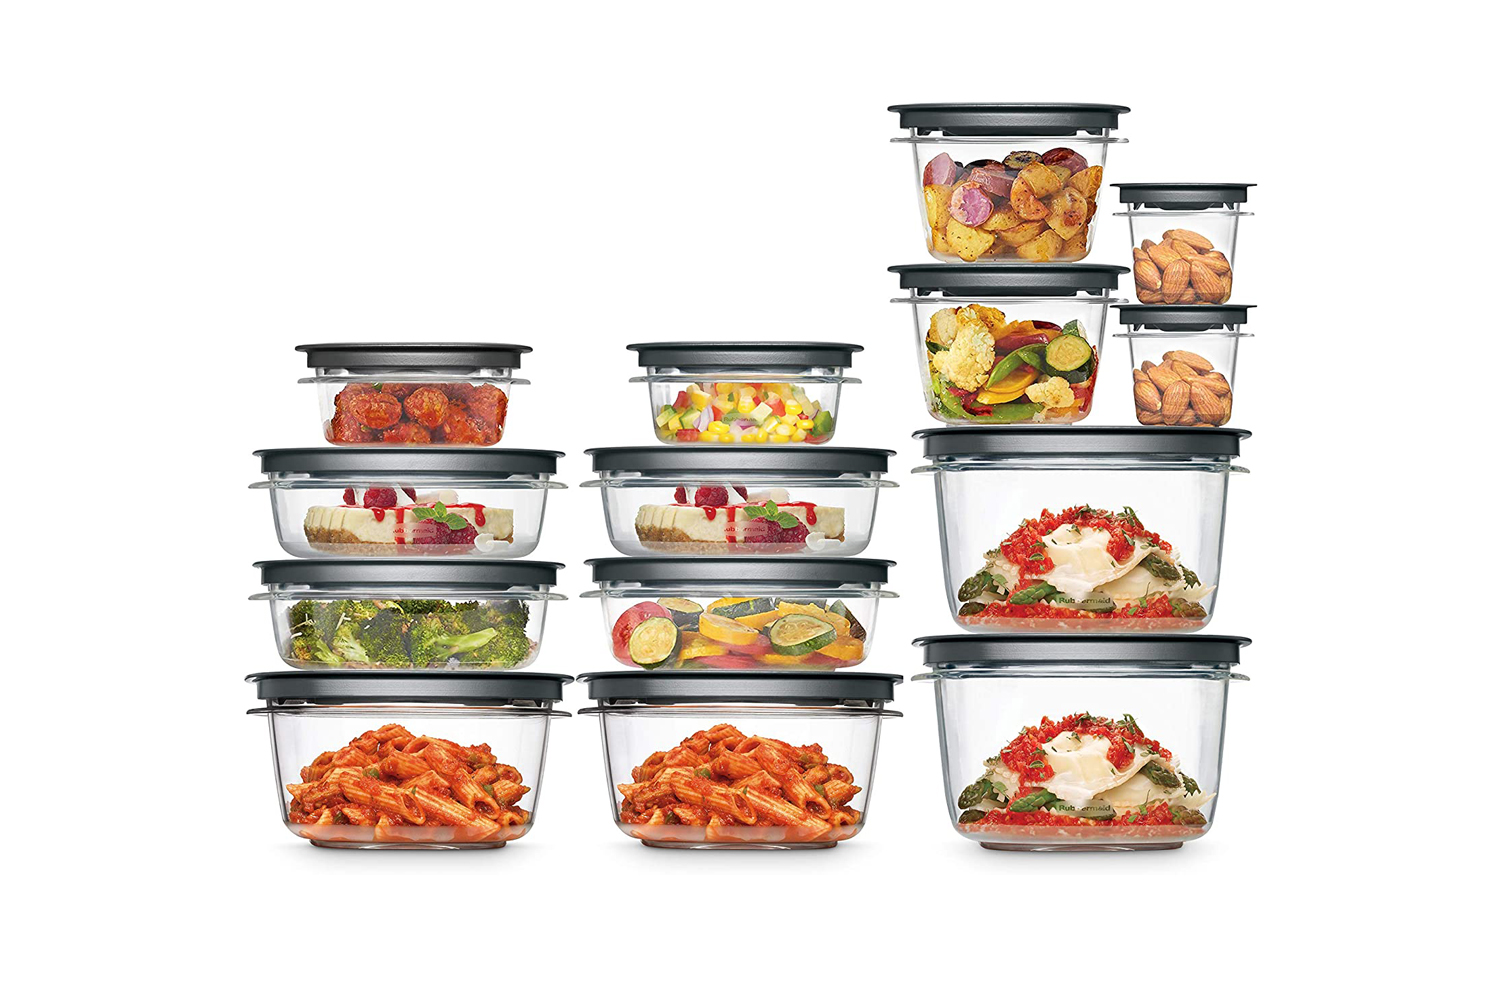 https://www.themanual.com/wp-content/uploads/sites/9/2021/09/rubbermaid-28-set-food-storage-container.jpg?fit=800%2C800&p=1